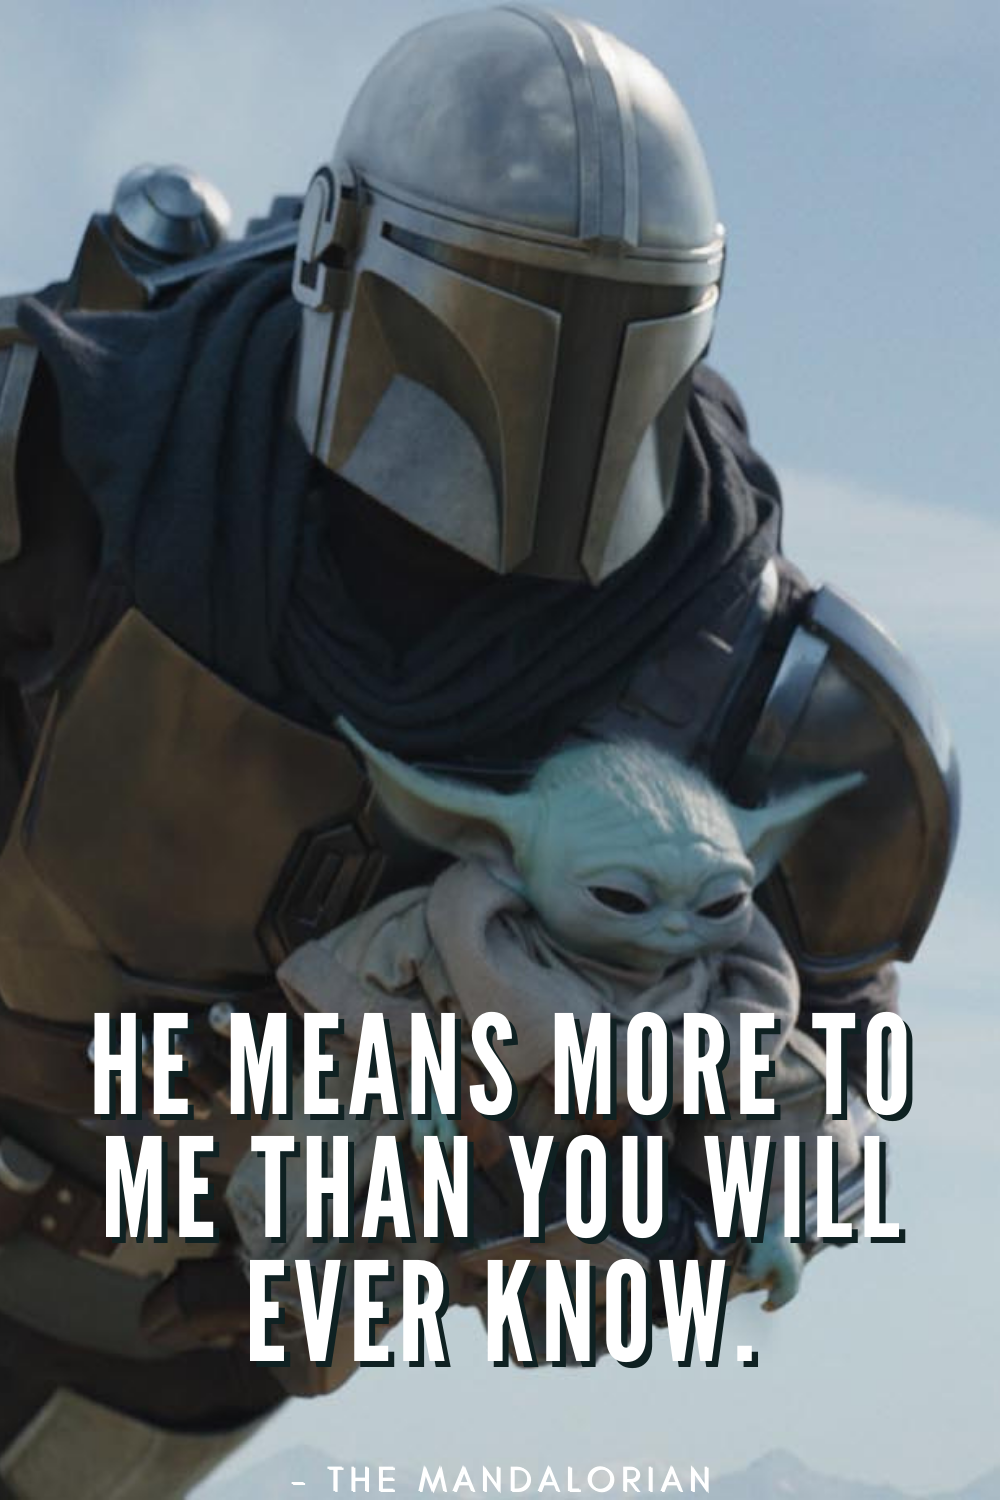 The Best Mandalorian Quotes from Season 2